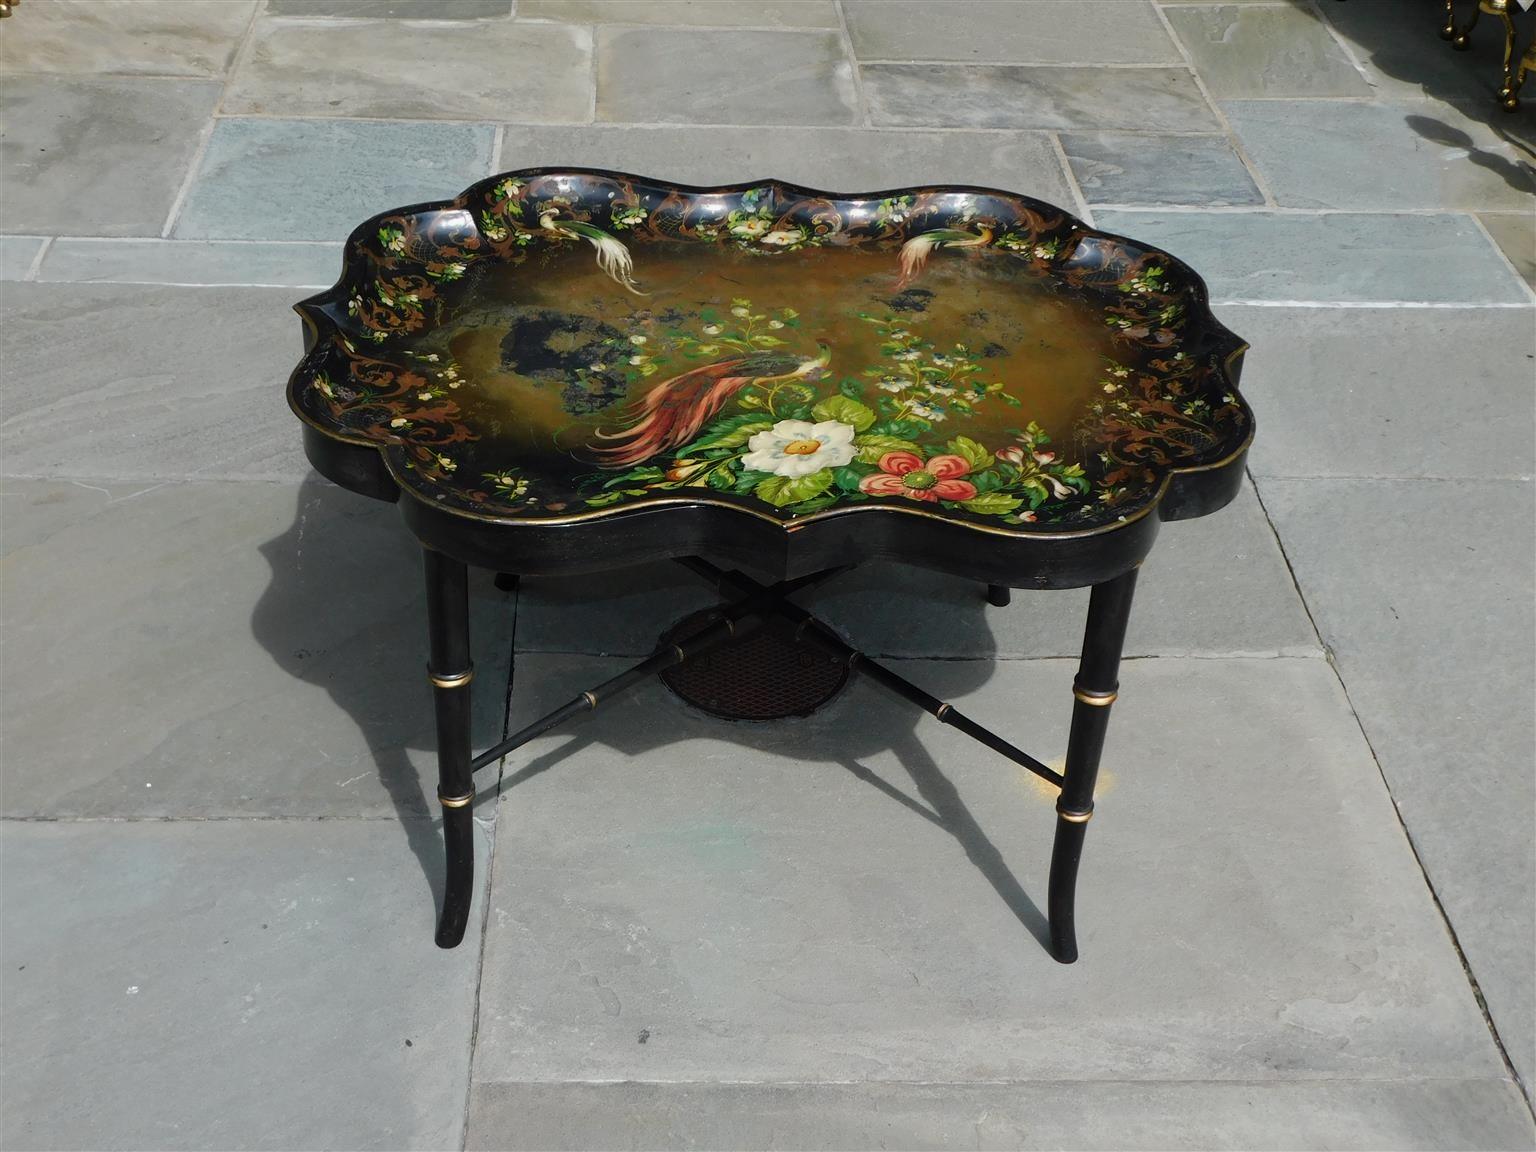 English scalloped Tole tray with decorative Peacock and foliage motif resting on a painted faux bamboo stand with cross stretchers. Early 19th Century.